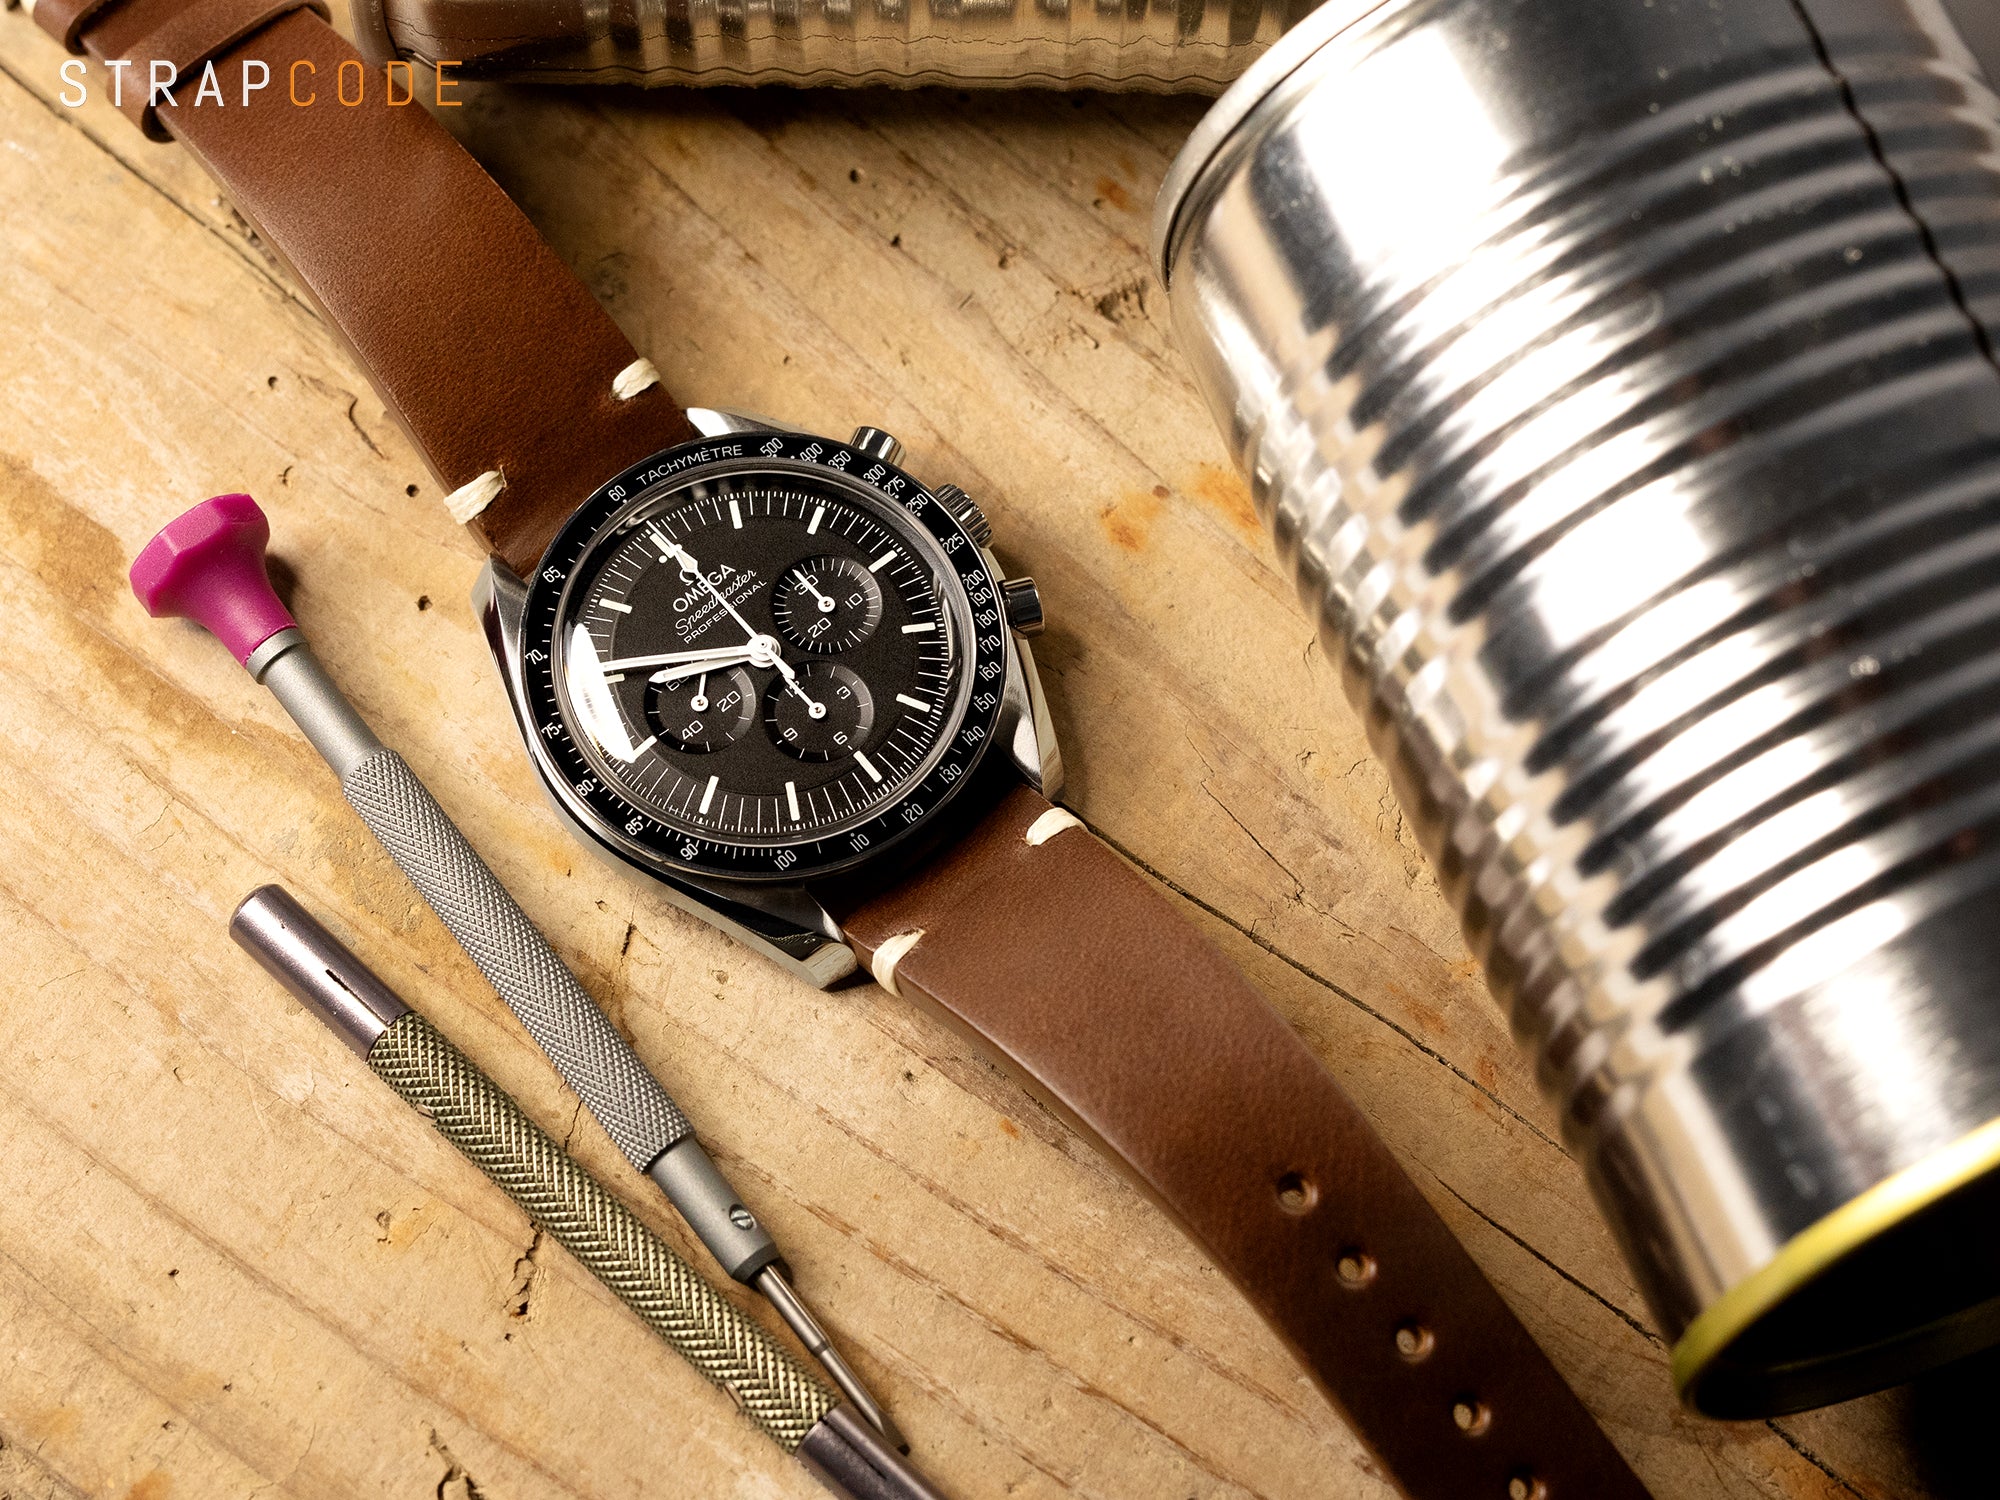 Horween leather strap is one of the most classy presentations of Omega Speedmaster 